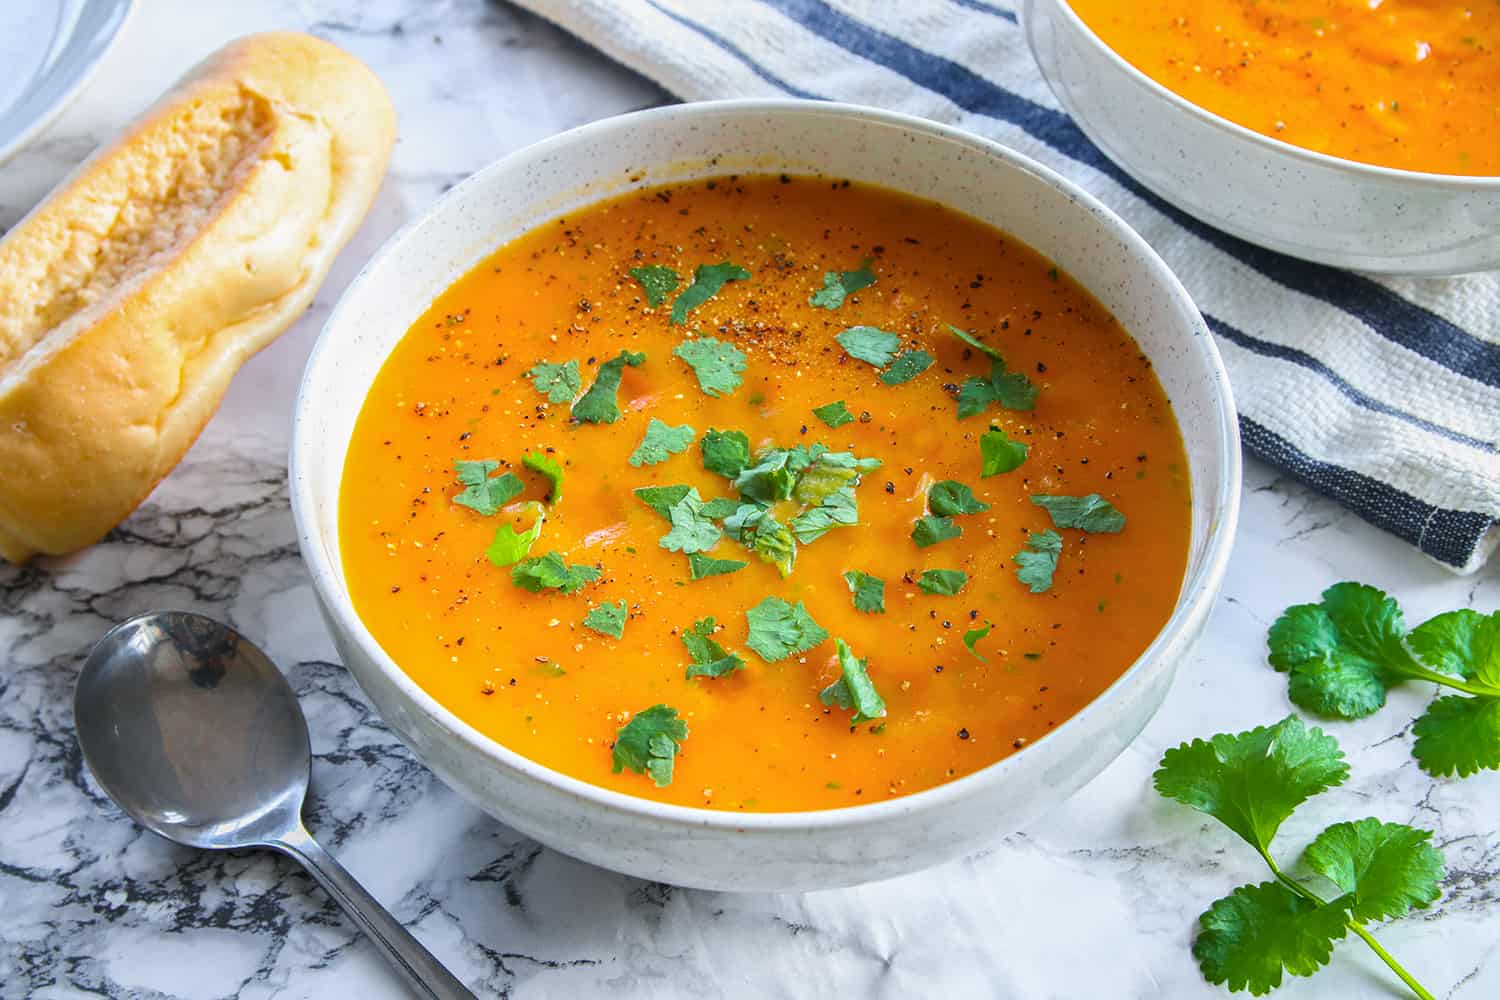 Easy Soup Maker Carrot Coriander Soup - We Eat At Last